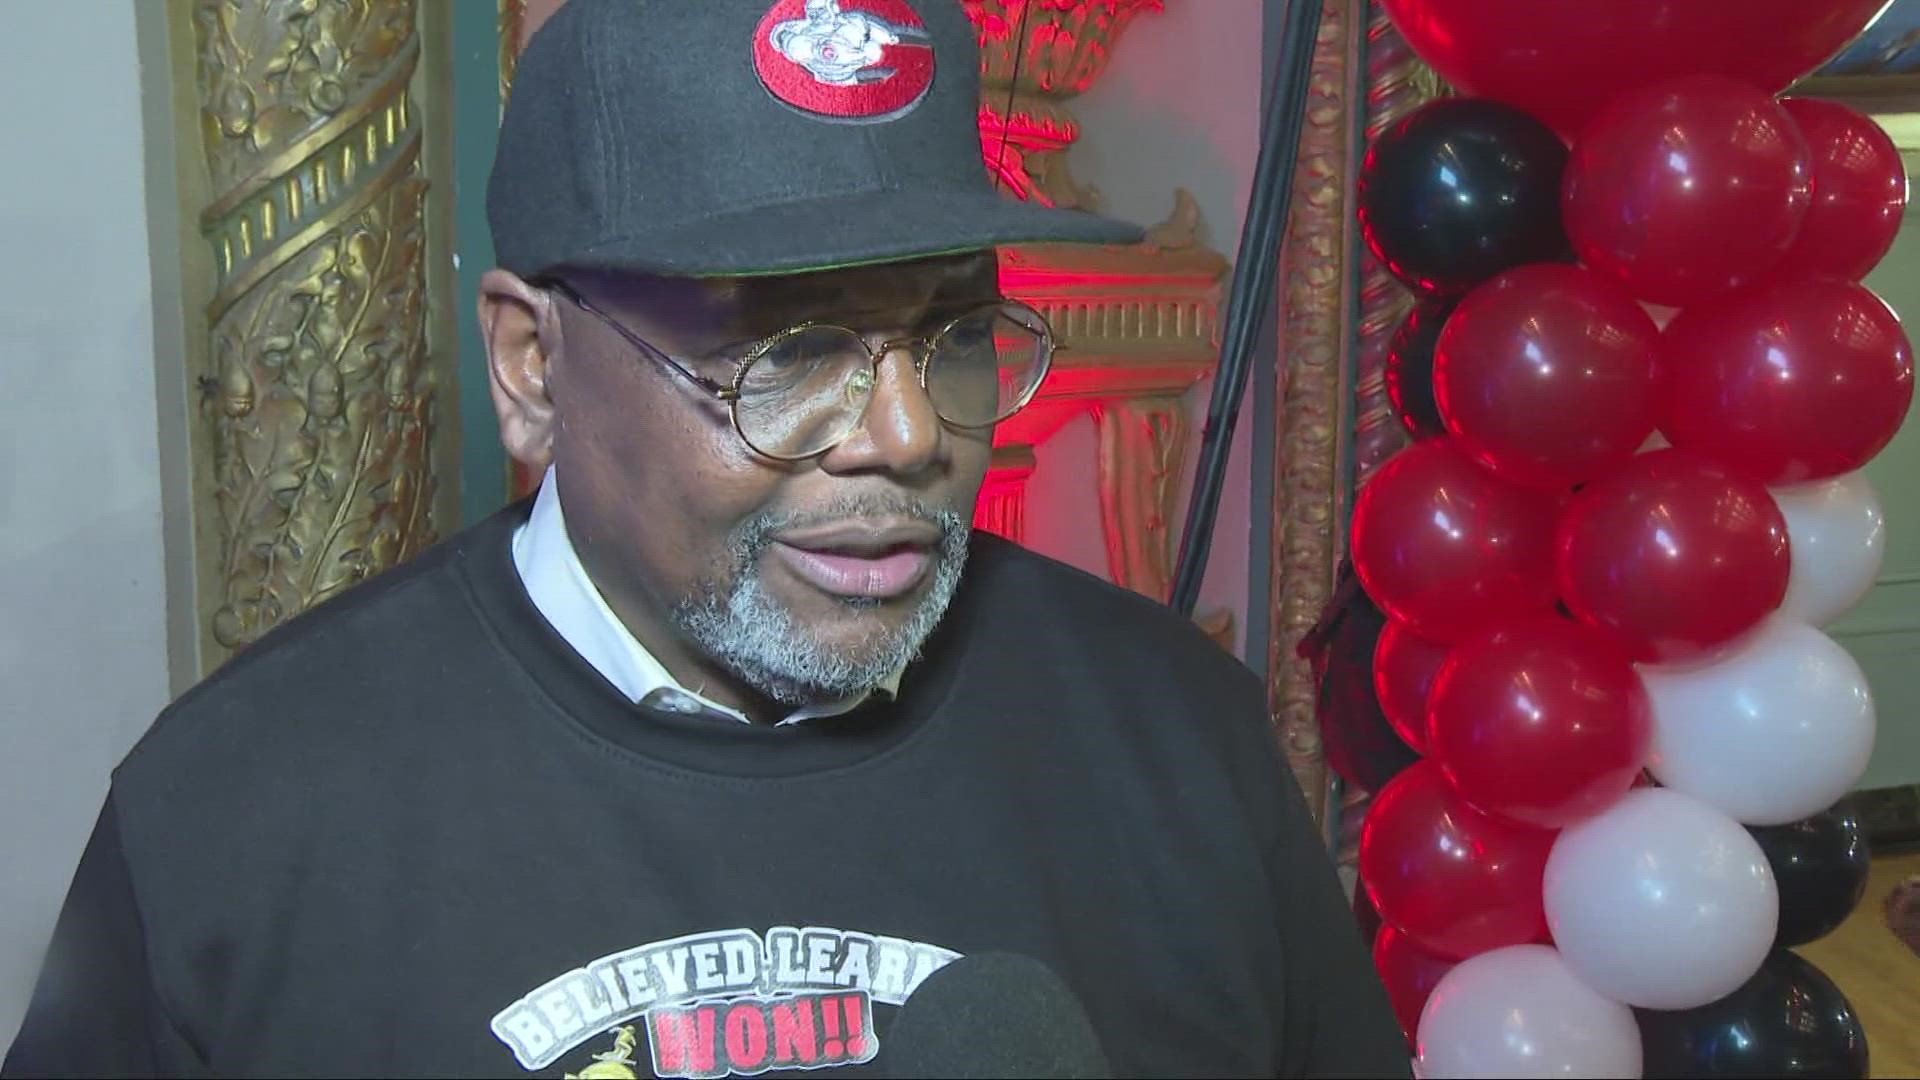 Ted Ginn Sr., who has served as Cleveland Glenville's head football coach since 1997, will be honored at the Greater Cleveland Sports Awards.